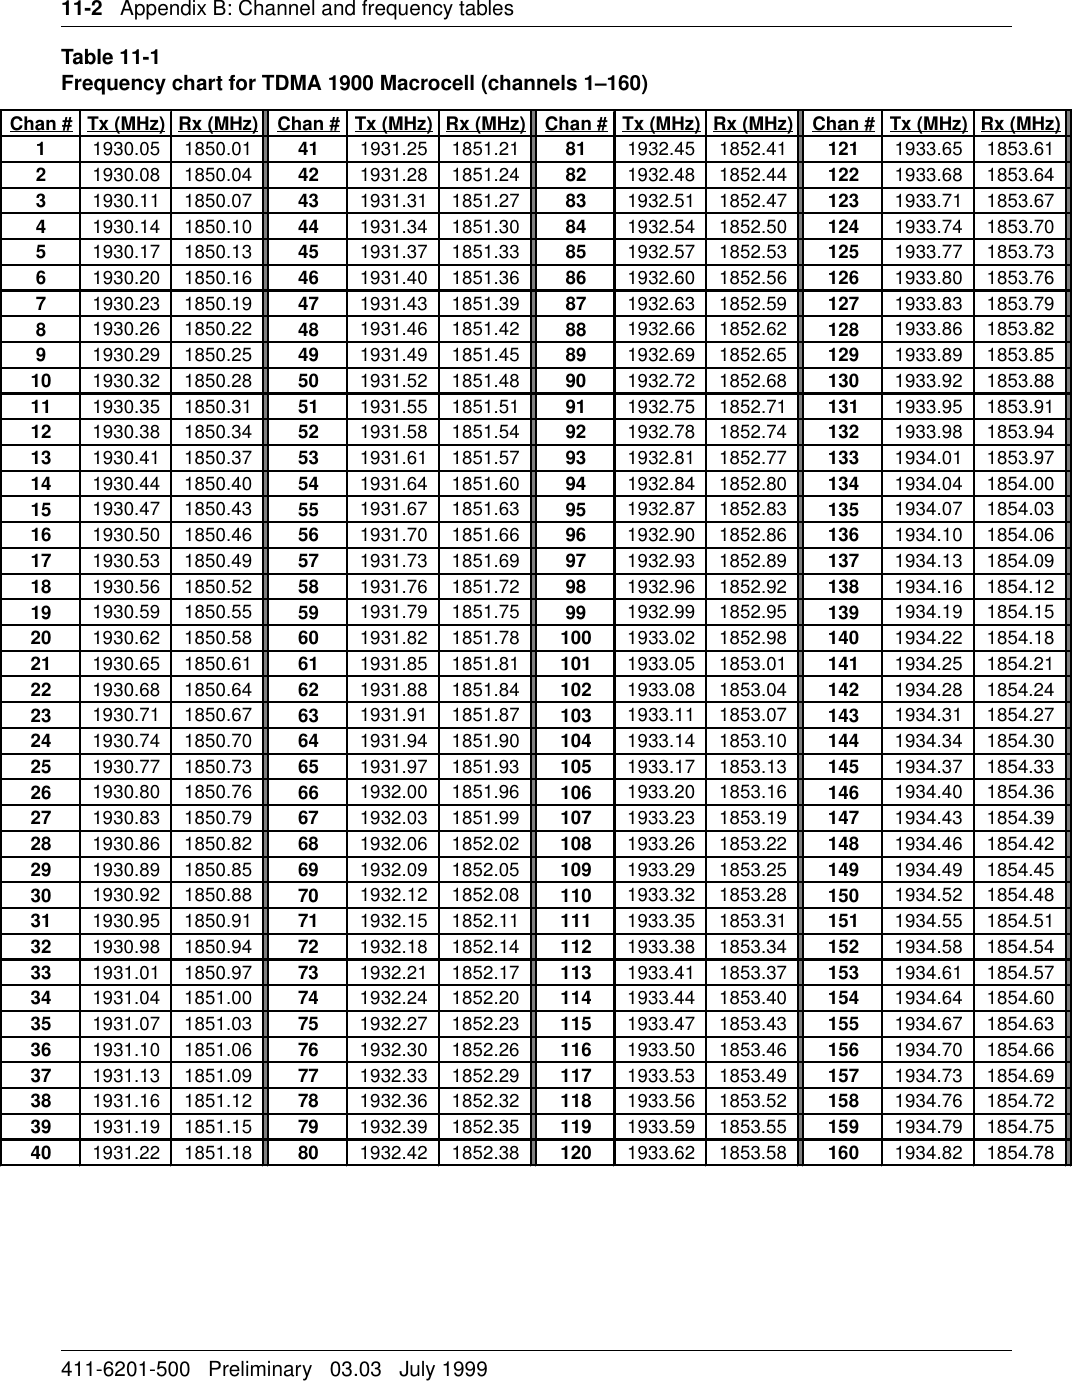 11-2   Appendix B: Channel and frequency tables411-6201-500   Preliminary   03.03   July 1999Table 11-1Frequency chart for TDMA 1900 Macrocell (channels 1–160) Chan # Tx (MHz) Rx (MHz) Chan # Tx (MHz) Rx (MHz) Chan # Tx (MHz) Rx (MHz) Chan # Tx (MHz) Rx (MHz)11930.05 1850.01 41 1931.25 1851.21 81 1932.45 1852.41 121 1933.65 1853.6121930.08 1850.04 42 1931.28 1851.24 82 1932.48 1852.44 122 1933.68 1853.6431930.11 1850.07 43 1931.31 1851.27 83 1932.51 1852.47 123 1933.71 1853.6741930.14 1850.10 44 1931.34 1851.30 84 1932.54 1852.50 124 1933.74 1853.7051930.17 1850.13 45 1931.37 1851.33 85 1932.57 1852.53 125 1933.77 1853.7361930.20 1850.16 46 1931.40 1851.36 86 1932.60 1852.56 126 1933.80 1853.7671930.23 1850.19 47 1931.43 1851.39 87 1932.63 1852.59 127 1933.83 1853.7981930.26 1850.22 48 1931.46 1851.42 88 1932.66 1852.62 128 1933.86 1853.8291930.29 1850.25 49 1931.49 1851.45 89 1932.69 1852.65 129 1933.89 1853.8510 1930.32 1850.28 50 1931.52 1851.48 90 1932.72 1852.68 130 1933.92 1853.8811 1930.35 1850.31 51 1931.55 1851.51 91 1932.75 1852.71 131 1933.95 1853.9112 1930.38 1850.34 52 1931.58 1851.54 92 1932.78 1852.74 132 1933.98 1853.9413 1930.41 1850.37 53 1931.61 1851.57 93 1932.81 1852.77 133 1934.01 1853.9714 1930.44 1850.40 54 1931.64 1851.60 94 1932.84 1852.80 134 1934.04 1854.0015 1930.47 1850.43 55 1931.67 1851.63 95 1932.87 1852.83 135 1934.07 1854.0316 1930.50 1850.46 56 1931.70 1851.66 96 1932.90 1852.86 136 1934.10 1854.0617 1930.53 1850.49 57 1931.73 1851.69 97 1932.93 1852.89 137 1934.13 1854.0918 1930.56 1850.52 58 1931.76 1851.72 98 1932.96 1852.92 138 1934.16 1854.1219 1930.59 1850.55 59 1931.79 1851.75 99 1932.99 1852.95 139 1934.19 1854.1520 1930.62 1850.58 60 1931.82 1851.78 100 1933.02 1852.98 140 1934.22 1854.1821 1930.65 1850.61 61 1931.85 1851.81 101 1933.05 1853.01 141 1934.25 1854.2122 1930.68 1850.64 62 1931.88 1851.84 102 1933.08 1853.04 142 1934.28 1854.2423 1930.71 1850.67 63 1931.91 1851.87 103 1933.11 1853.07 143 1934.31 1854.2724 1930.74 1850.70 64 1931.94 1851.90 104 1933.14 1853.10 144 1934.34 1854.3025 1930.77 1850.73 65 1931.97 1851.93 105 1933.17 1853.13 145 1934.37 1854.3326 1930.80 1850.76 66 1932.00 1851.96 106 1933.20 1853.16 146 1934.40 1854.3627 1930.83 1850.79 67 1932.03 1851.99 107 1933.23 1853.19 147 1934.43 1854.3928 1930.86 1850.82 68 1932.06 1852.02 108 1933.26 1853.22 148 1934.46 1854.4229 1930.89 1850.85 69 1932.09 1852.05 109 1933.29 1853.25 149 1934.49 1854.4530 1930.92 1850.88 70 1932.12 1852.08 110 1933.32 1853.28 150 1934.52 1854.4831 1930.95 1850.91 71 1932.15 1852.11 111 1933.35 1853.31 151 1934.55 1854.5132 1930.98 1850.94 72 1932.18 1852.14 112 1933.38 1853.34 152 1934.58 1854.5433 1931.01 1850.97 73 1932.21 1852.17 113 1933.41 1853.37 153 1934.61 1854.5734 1931.04 1851.00 74 1932.24 1852.20 114 1933.44 1853.40 154 1934.64 1854.6035 1931.07 1851.03 75 1932.27 1852.23 115 1933.47 1853.43 155 1934.67 1854.6336 1931.10 1851.06 76 1932.30 1852.26 116 1933.50 1853.46 156 1934.70 1854.6637 1931.13 1851.09 77 1932.33 1852.29 117 1933.53 1853.49 157 1934.73 1854.6938 1931.16 1851.12 78 1932.36 1852.32 118 1933.56 1853.52 158 1934.76 1854.7239 1931.19 1851.15 79 1932.39 1852.35 119 1933.59 1853.55 159 1934.79 1854.7540 1931.22 1851.18 80 1932.42 1852.38 120 1933.62 1853.58 160 1934.82 1854.78